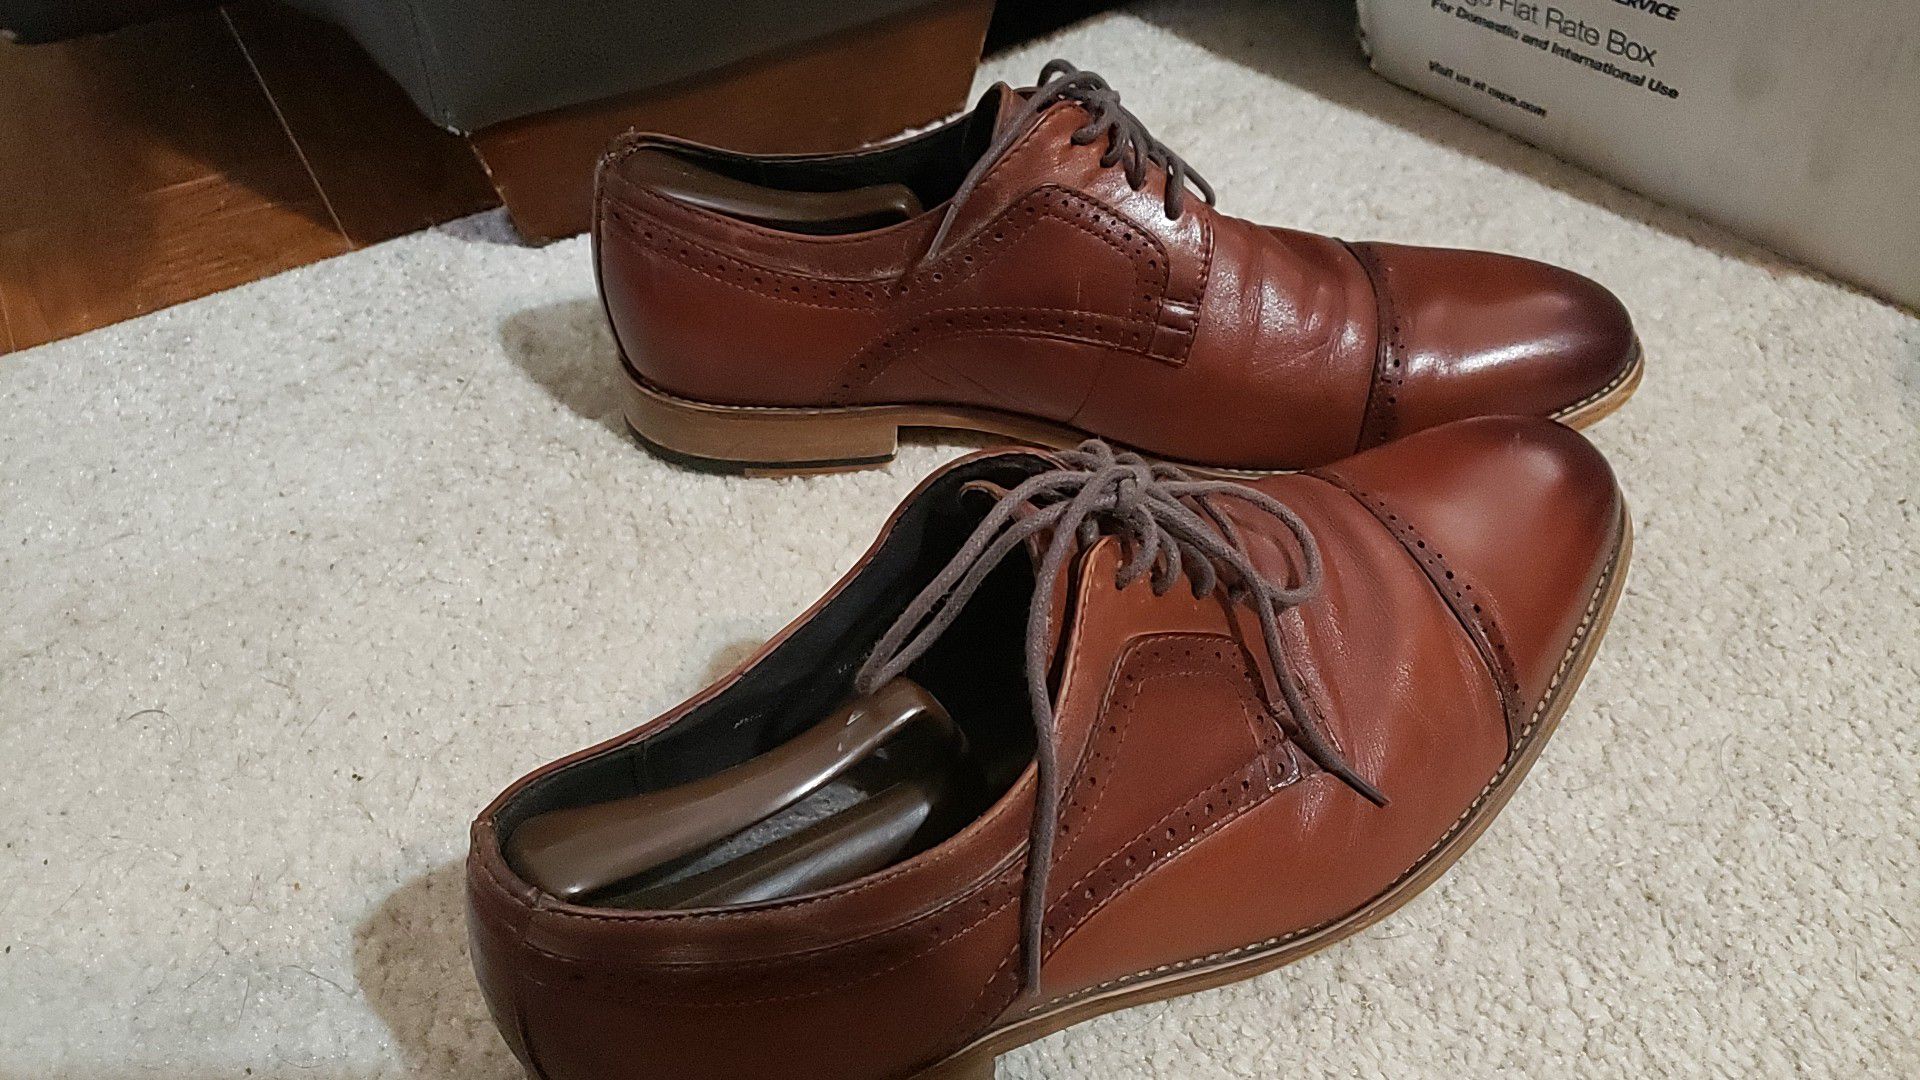 Stacy Adam's dress shoes size 11-11.5